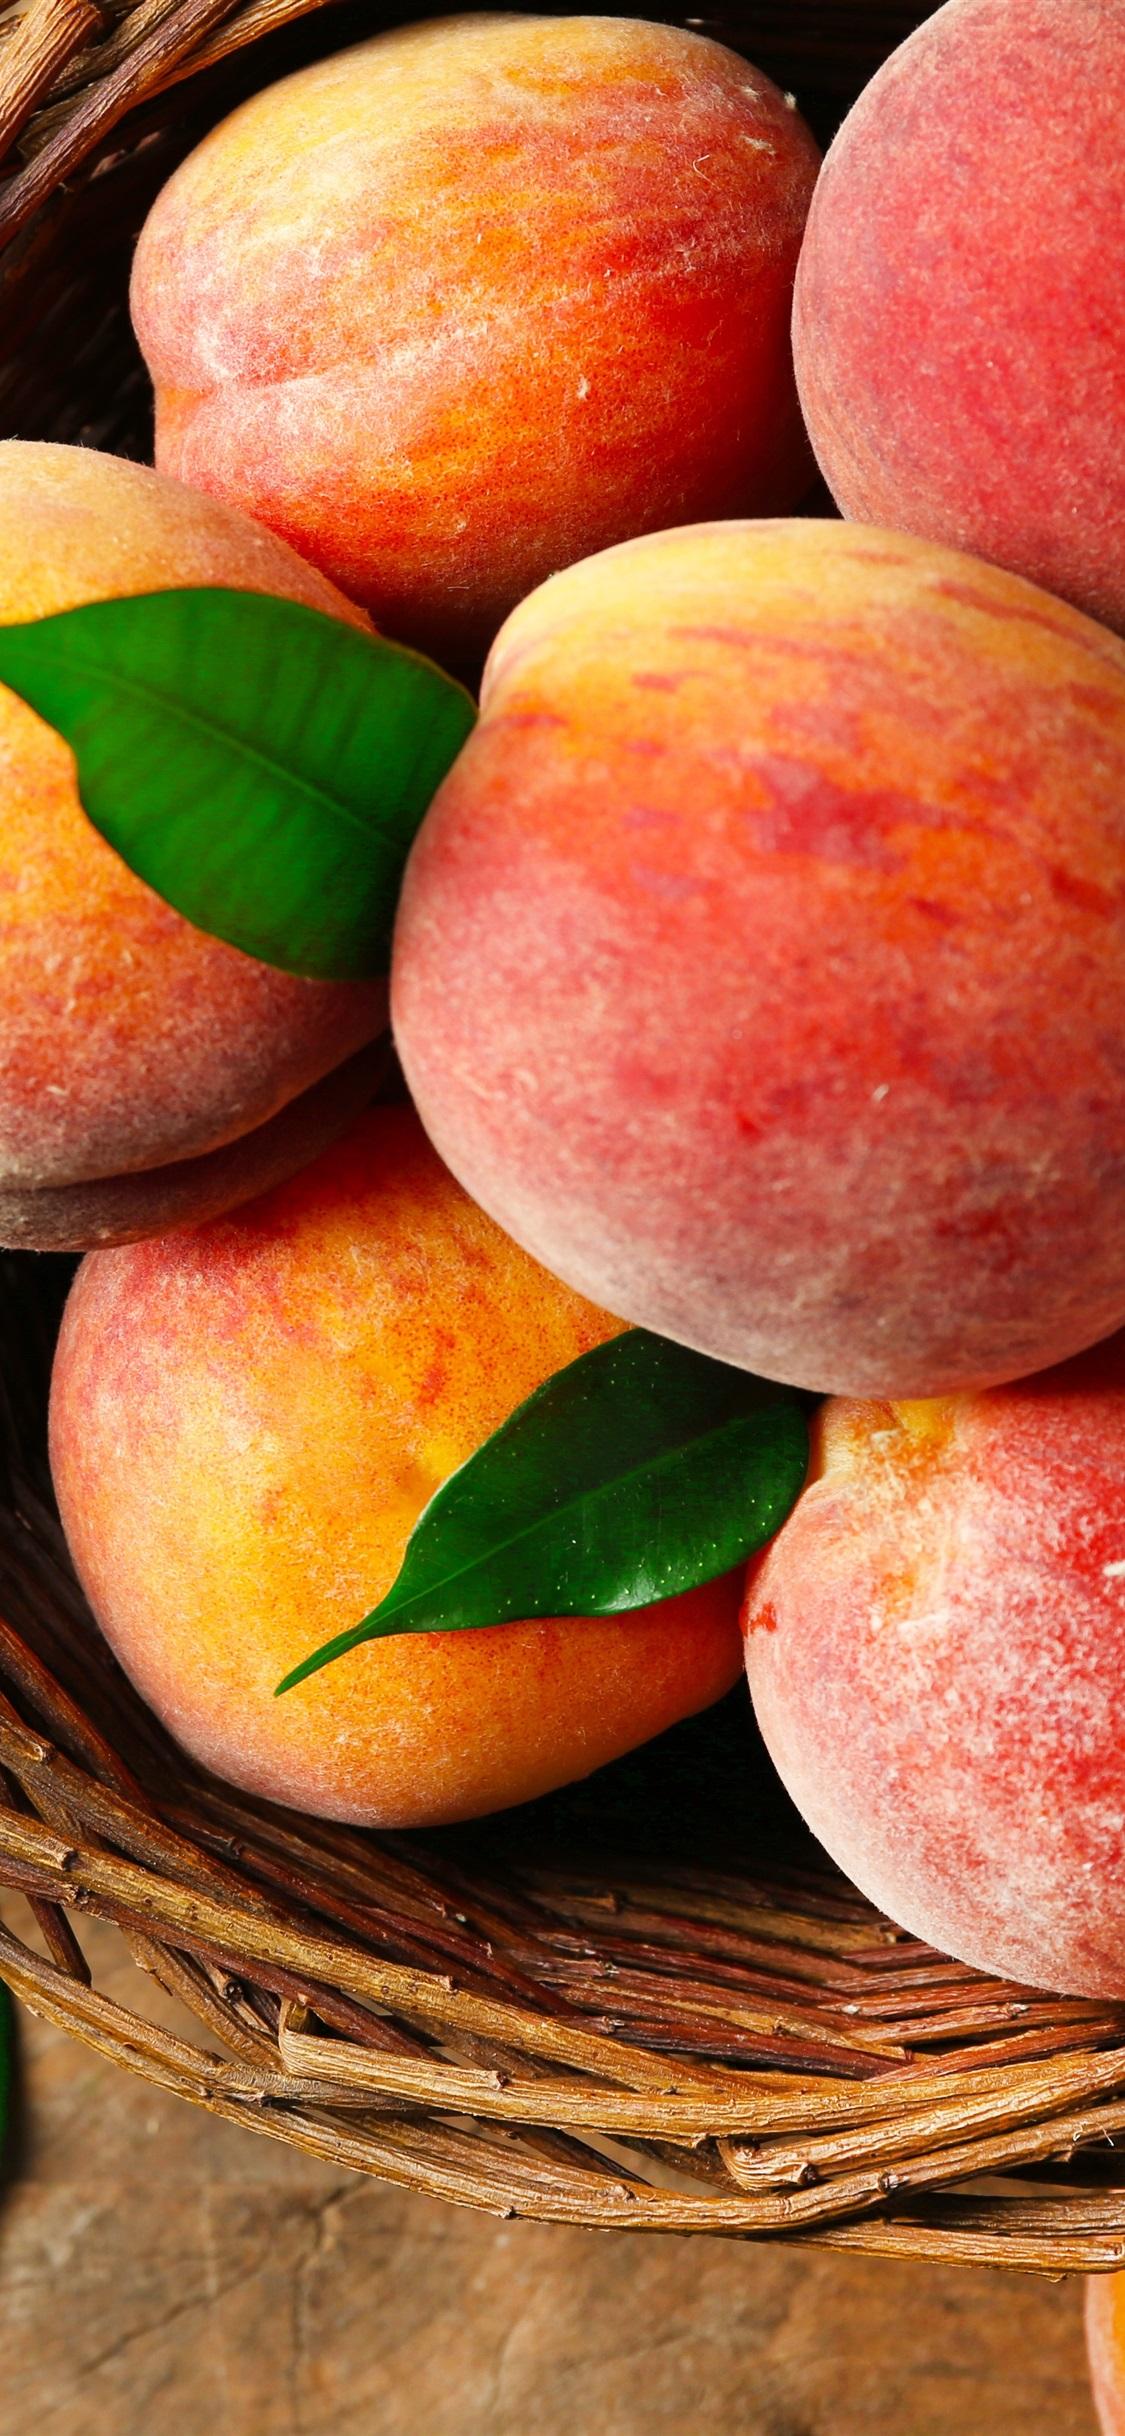 Wallpaper Red peaches, delicious fruit 3840x2160 UHD 4K Picture, Image